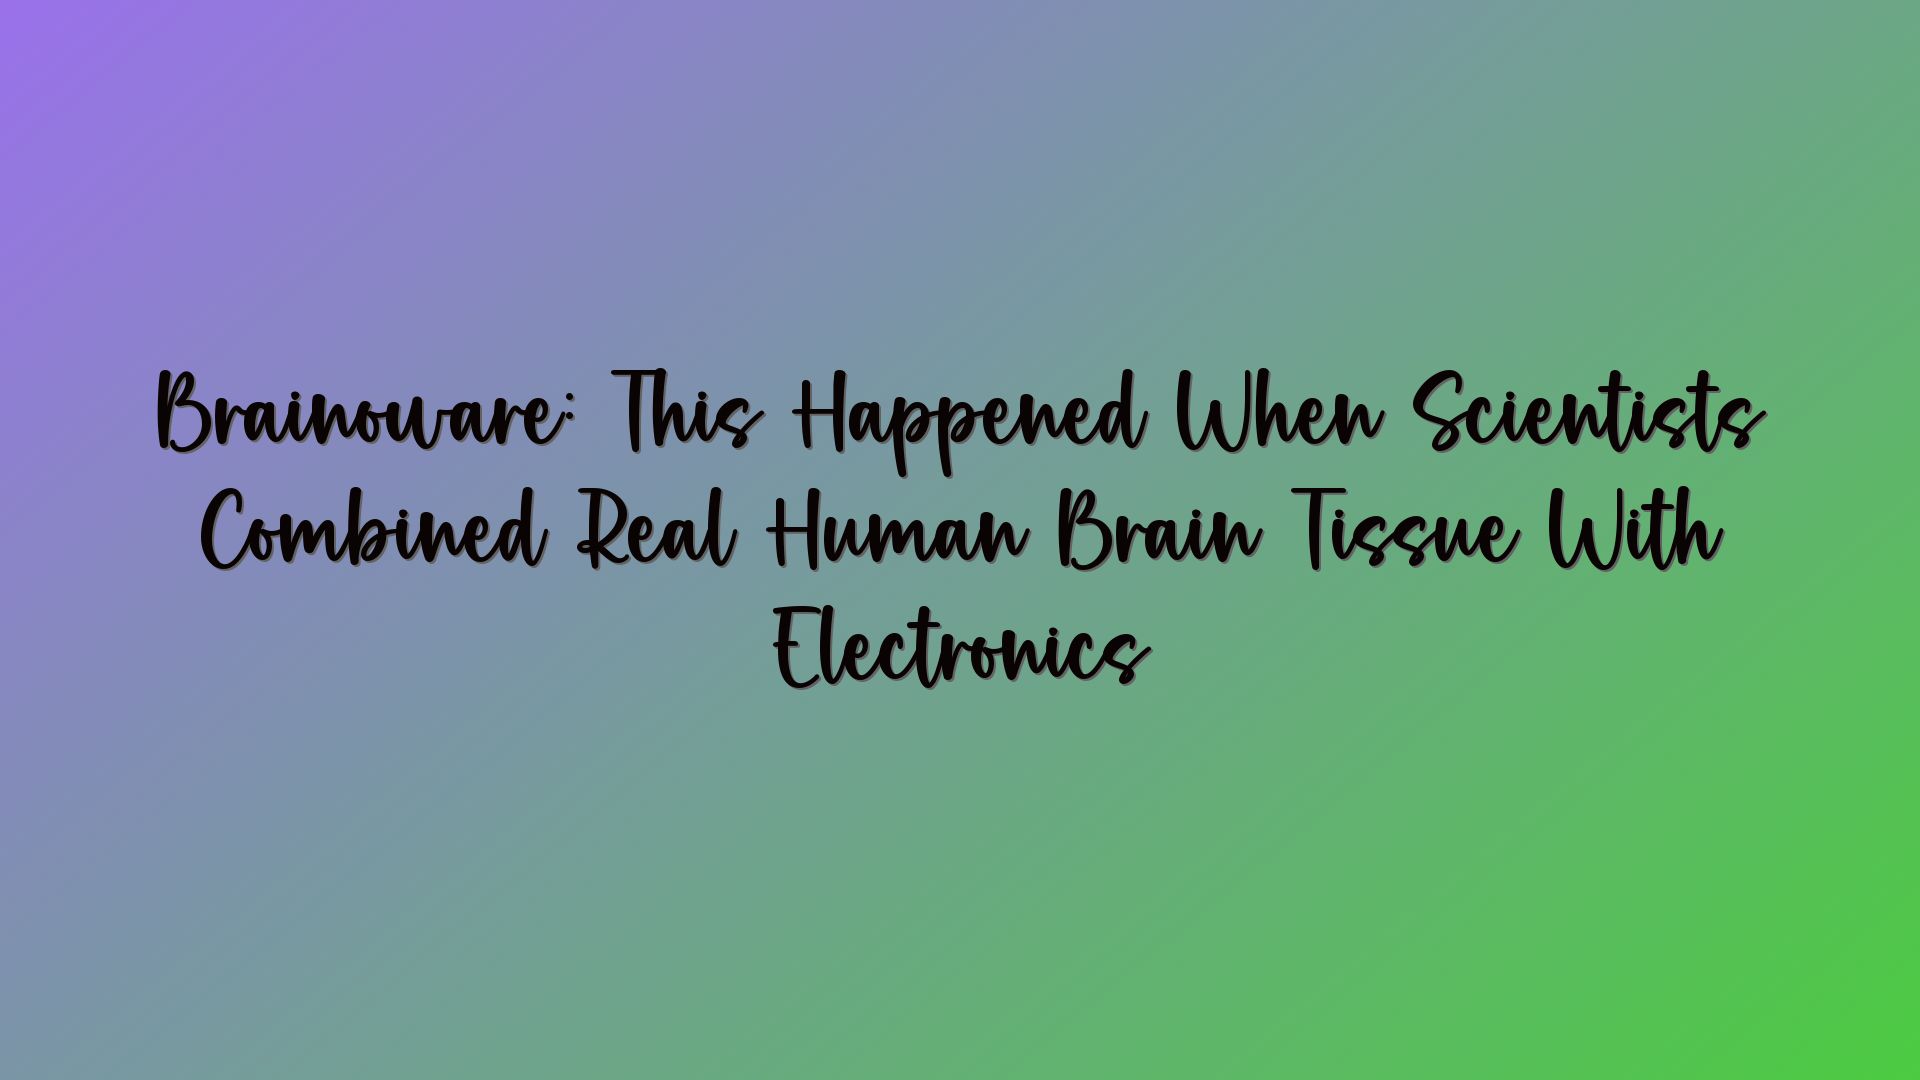 Brainoware: This Happened When Scientists Combined Real Human Brain Tissue With Electronics